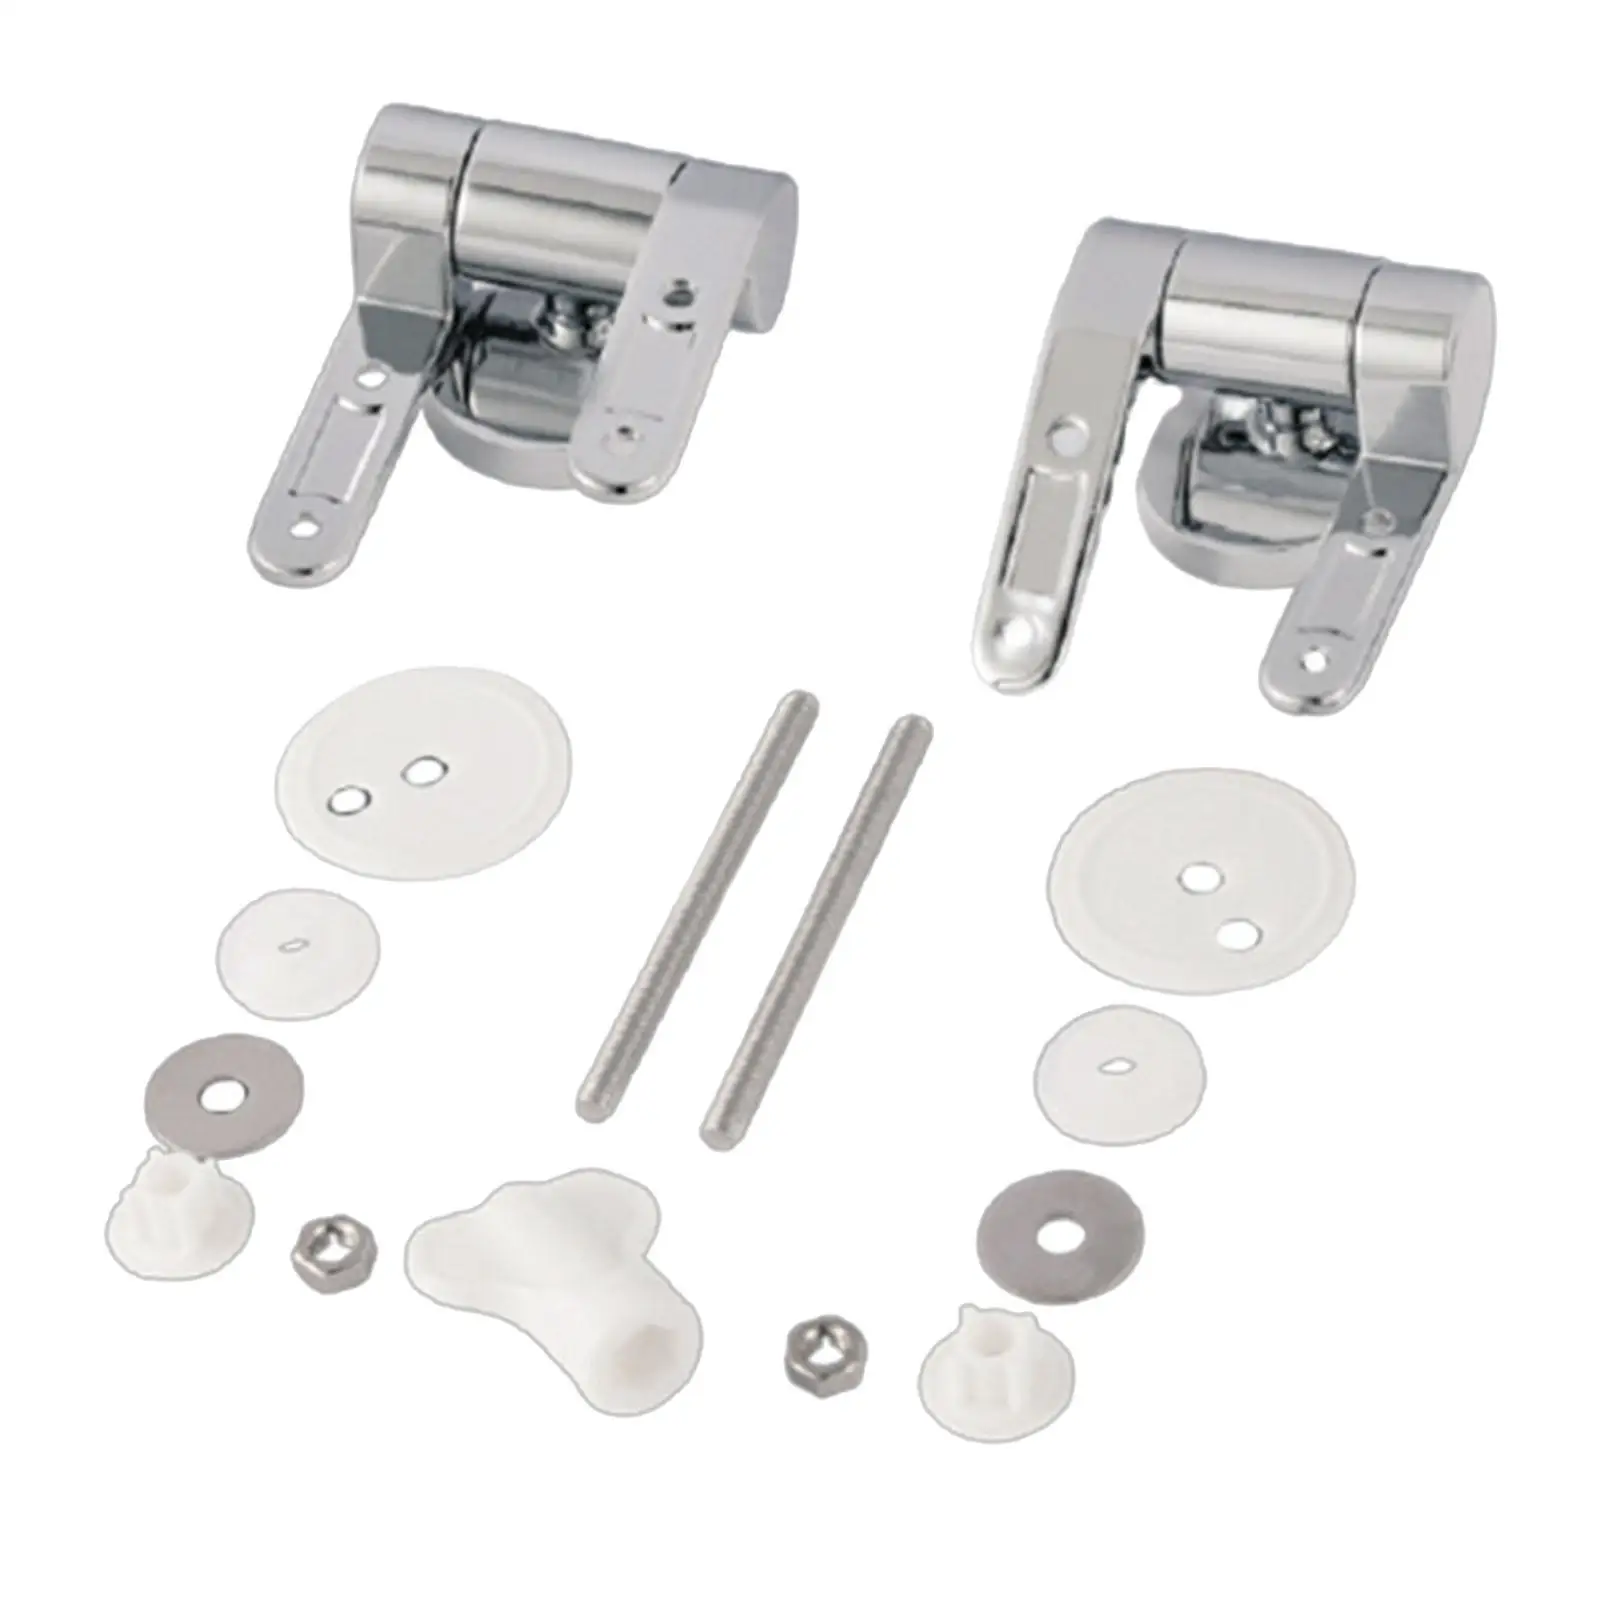 Toilet Seat Hinge Mountings Replacement Parts Zinc Alloy Mounting Fixed Joint for Kitchen Flipping Sliding Bath Rice Cooker Lids